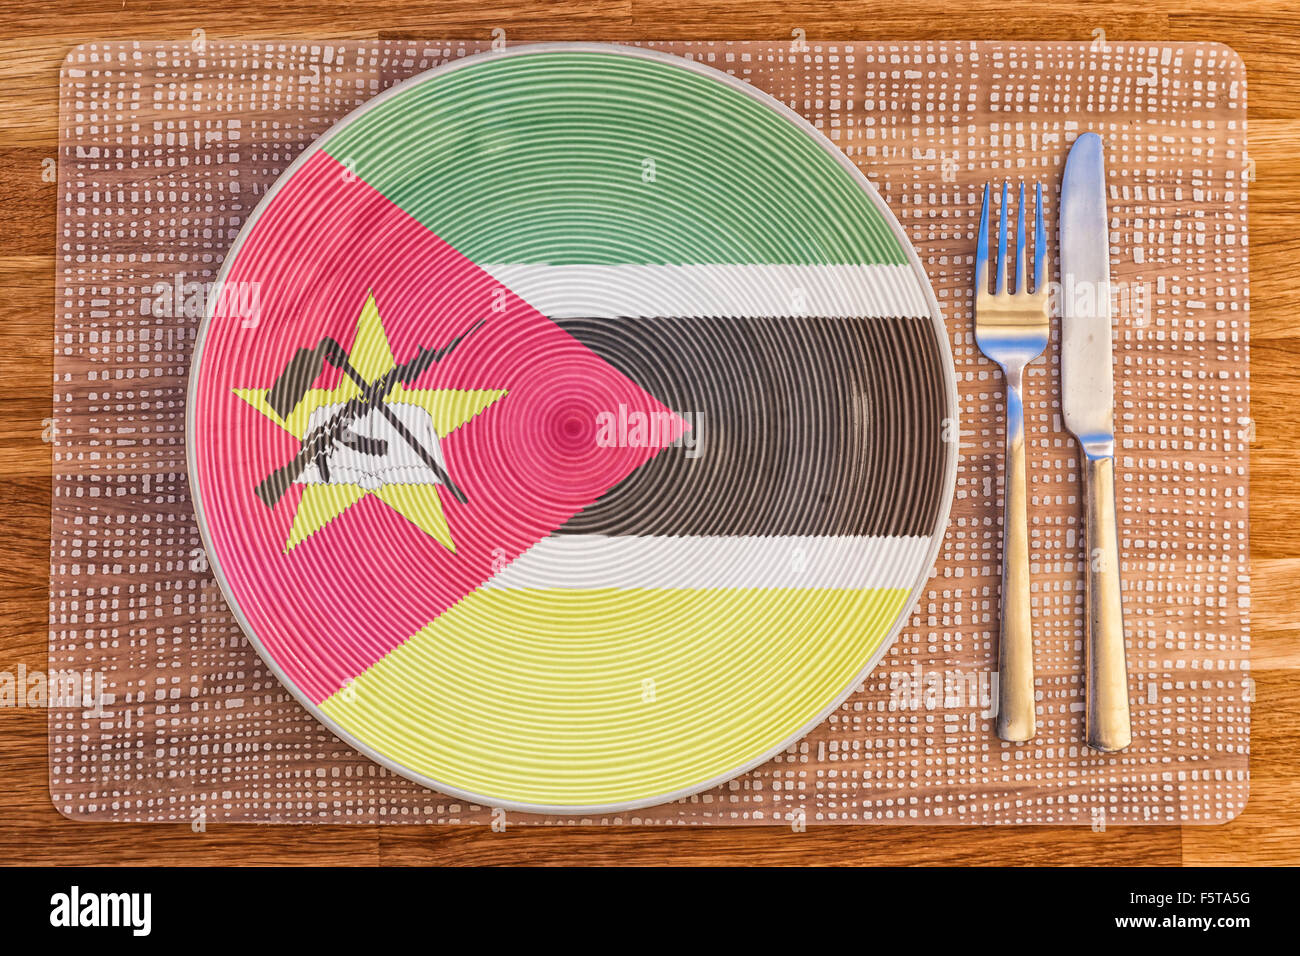 Dinner plate with the flag of Mozambique on it for your international food and drink concepts. Stock Photo